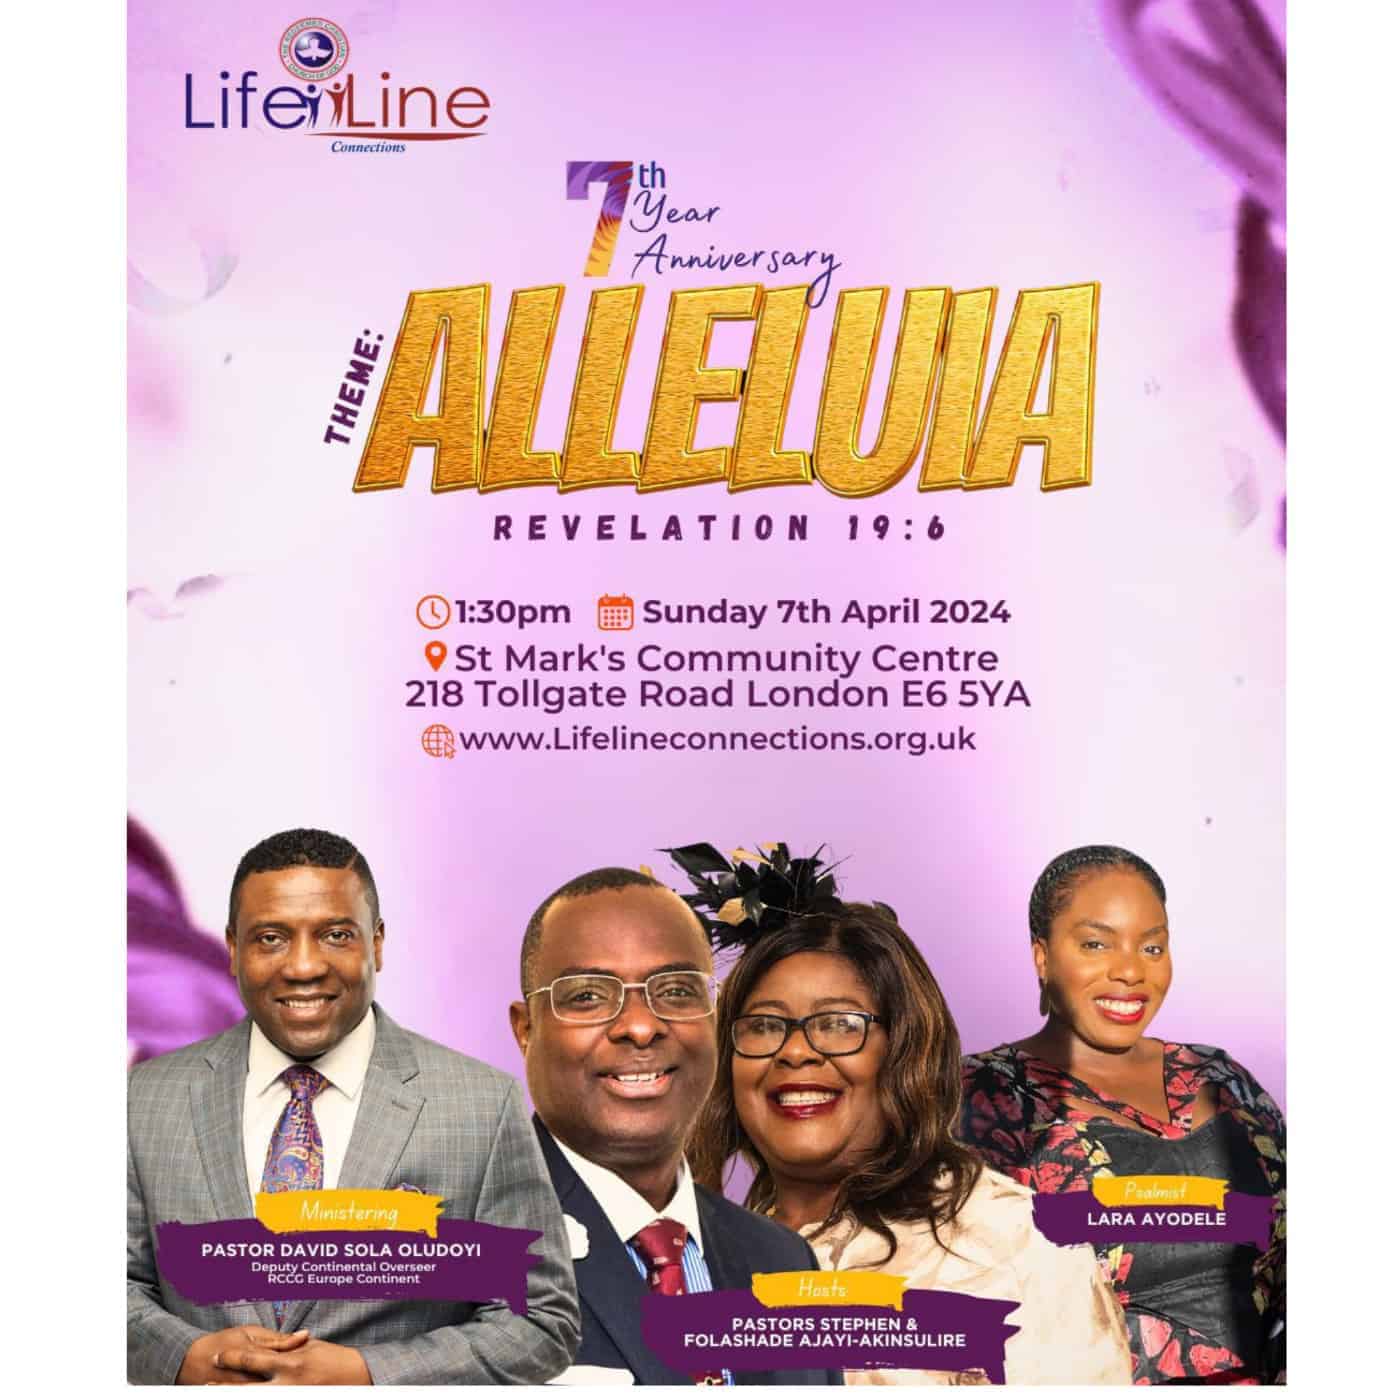 RCCG Lifeline Connections - Celebrating Christmas in Style 2021